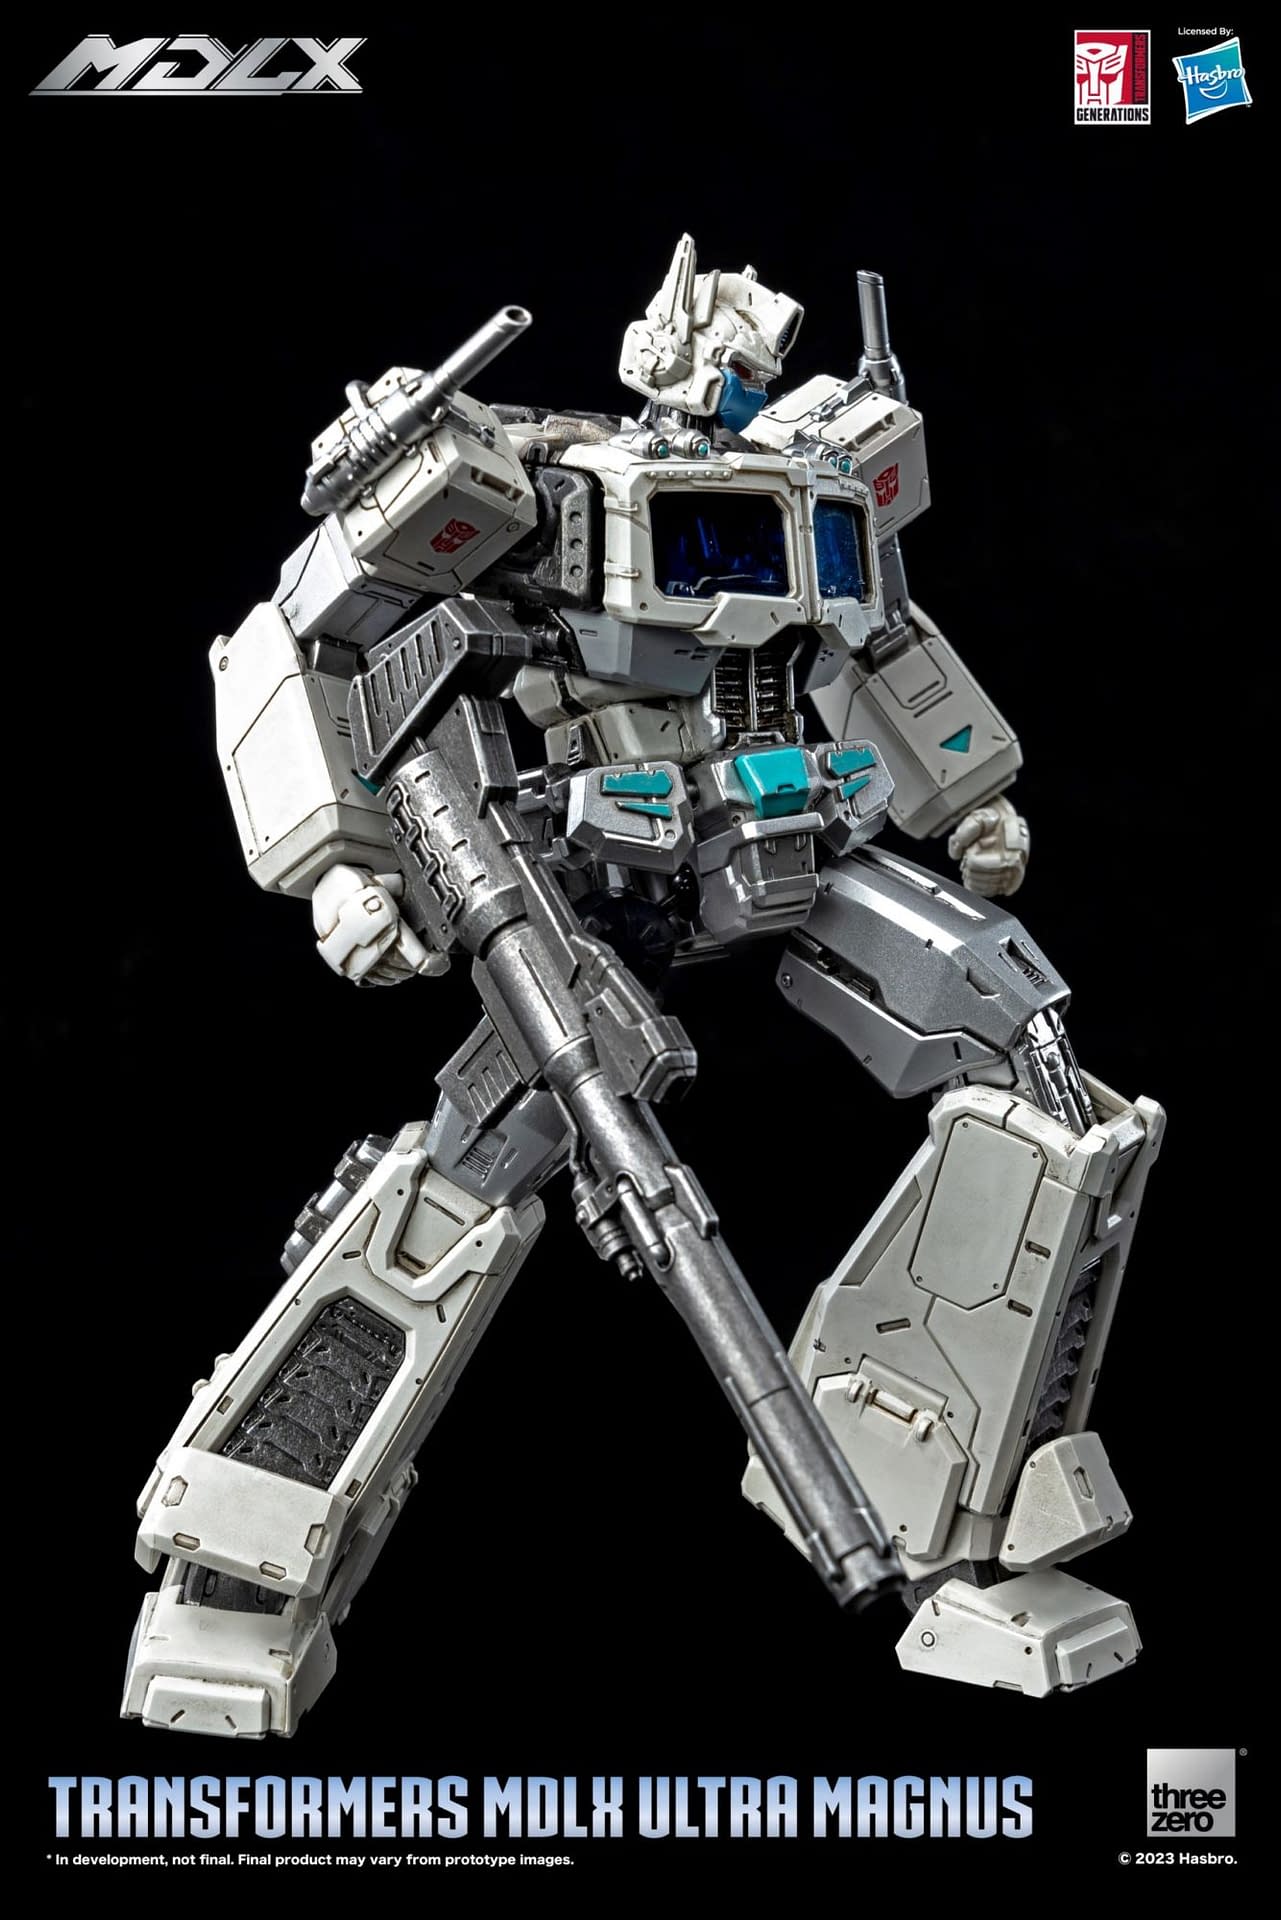 Transformers Ultra Magnus MDLX Figures Coming Soon from threezero